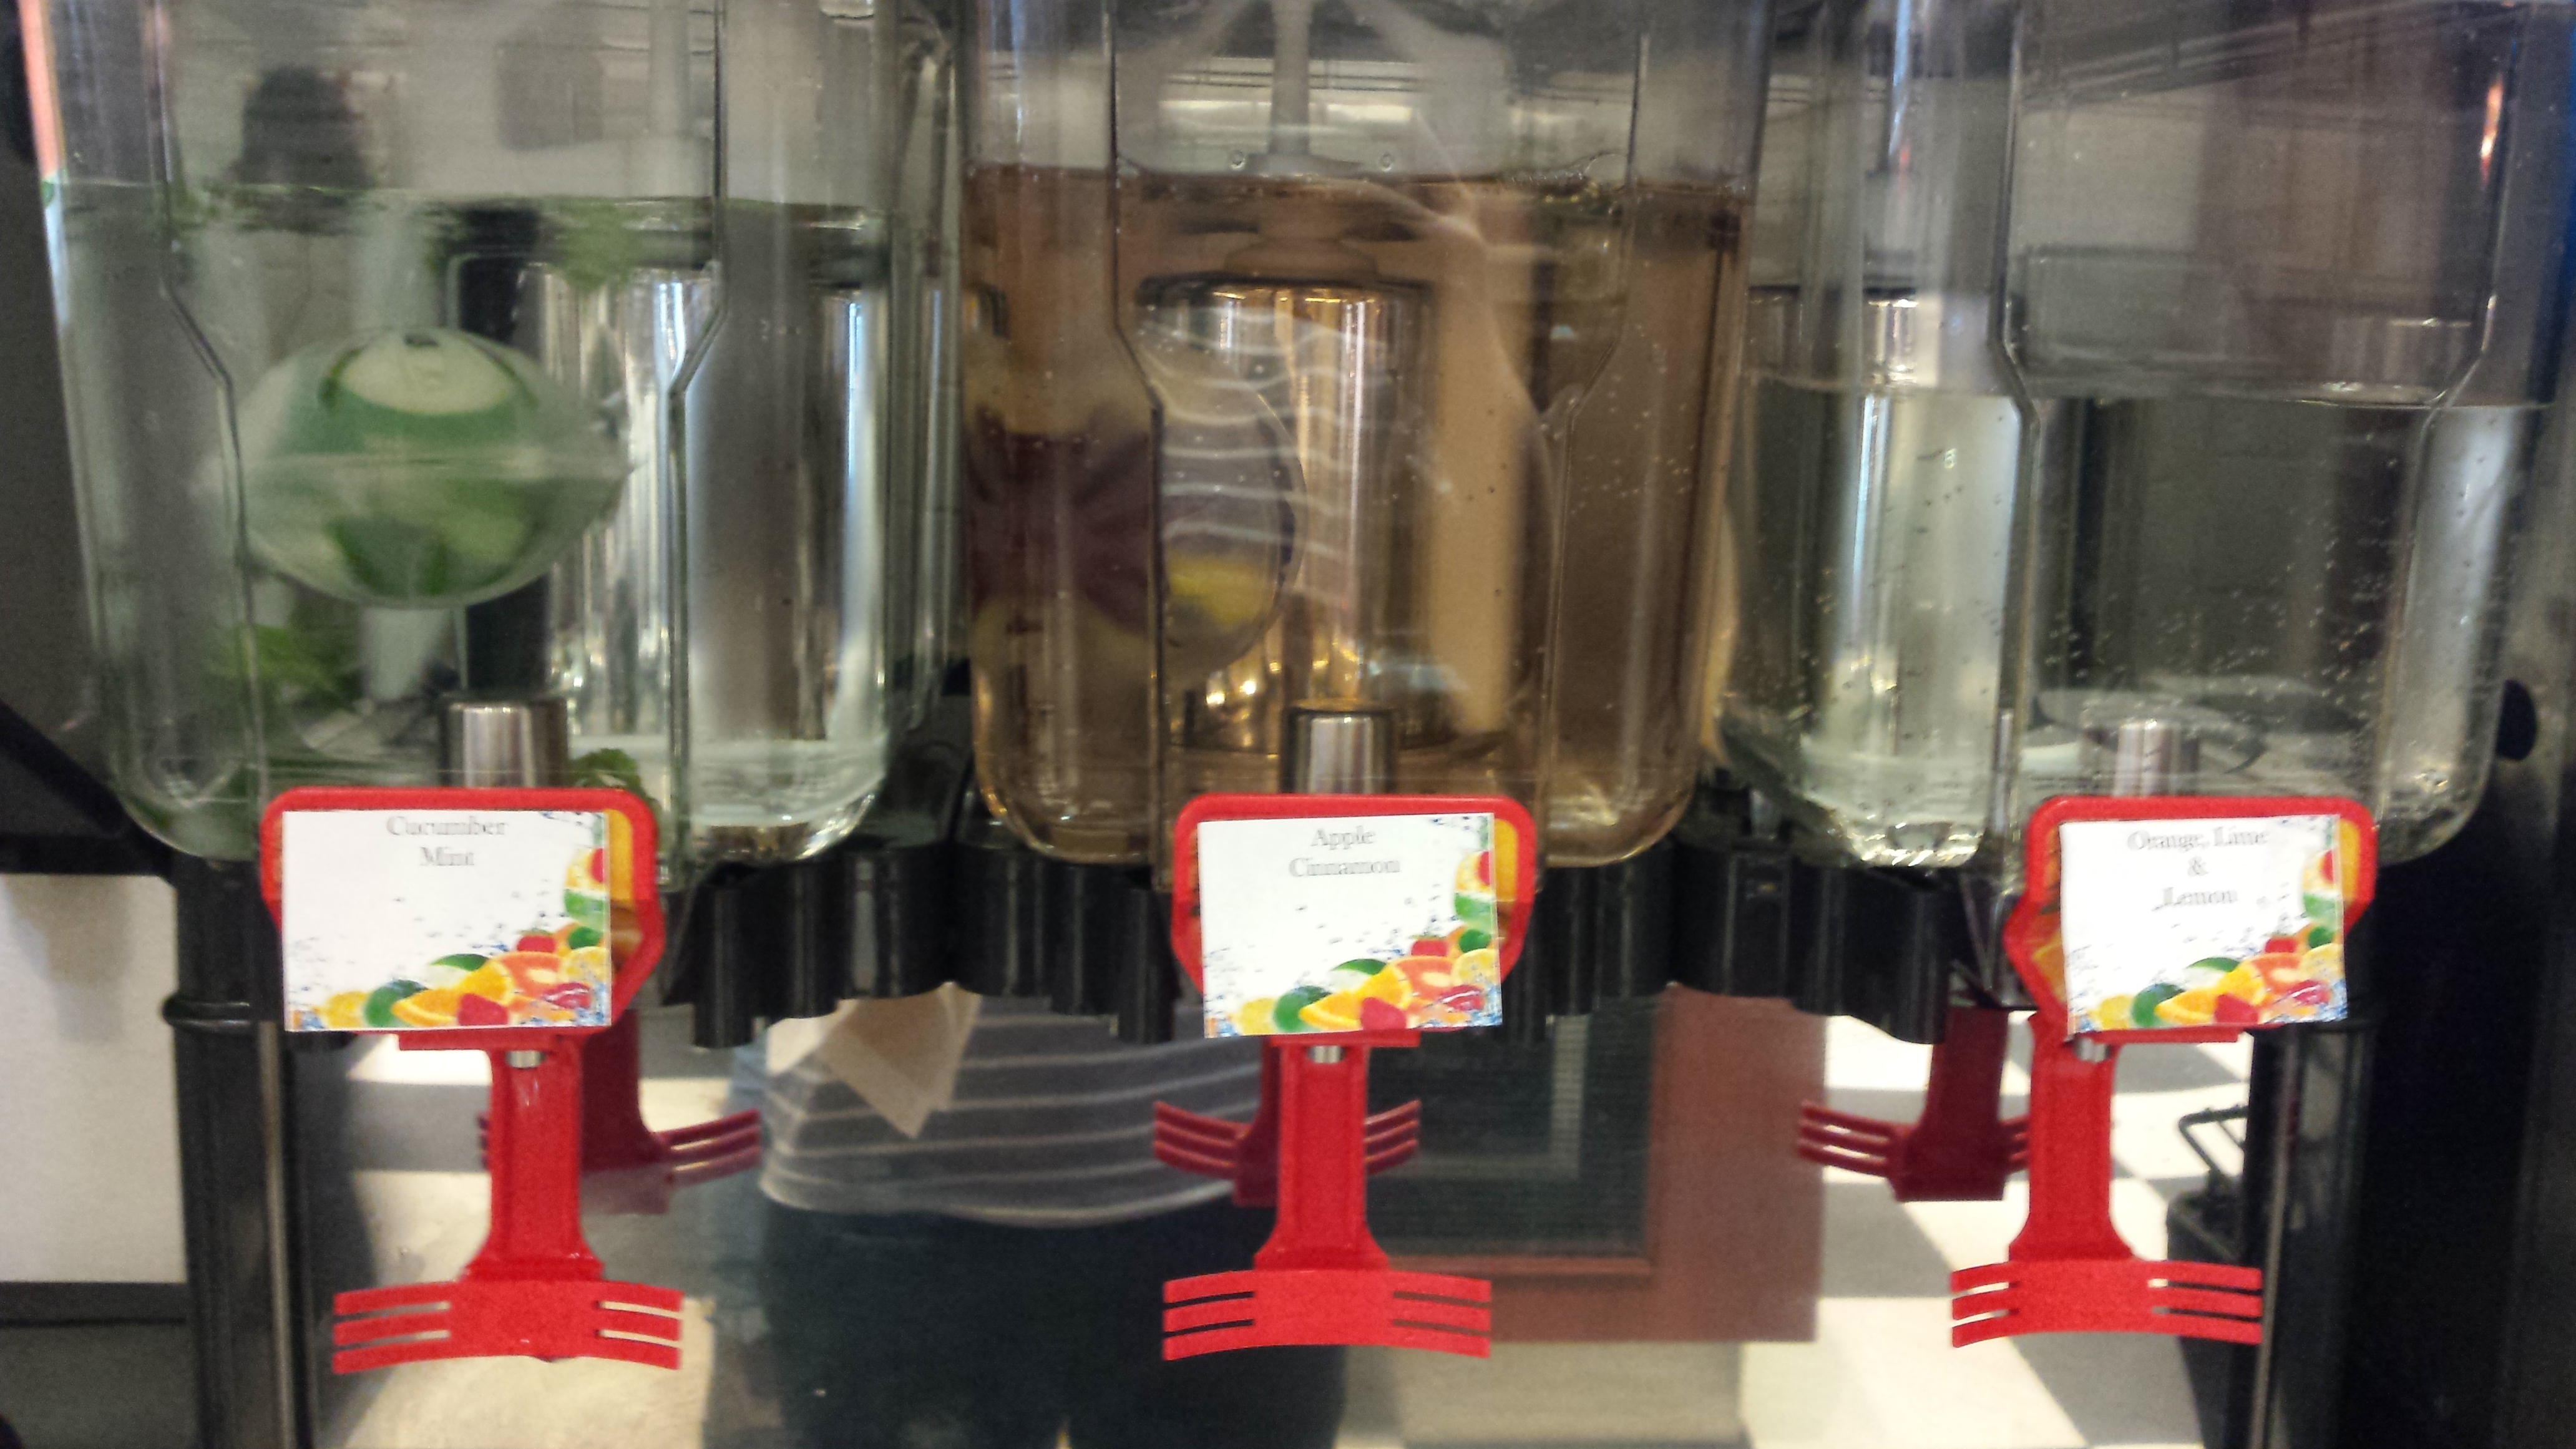 The residence dining hall I eat in just introduced infused water stations. I am SO excited!